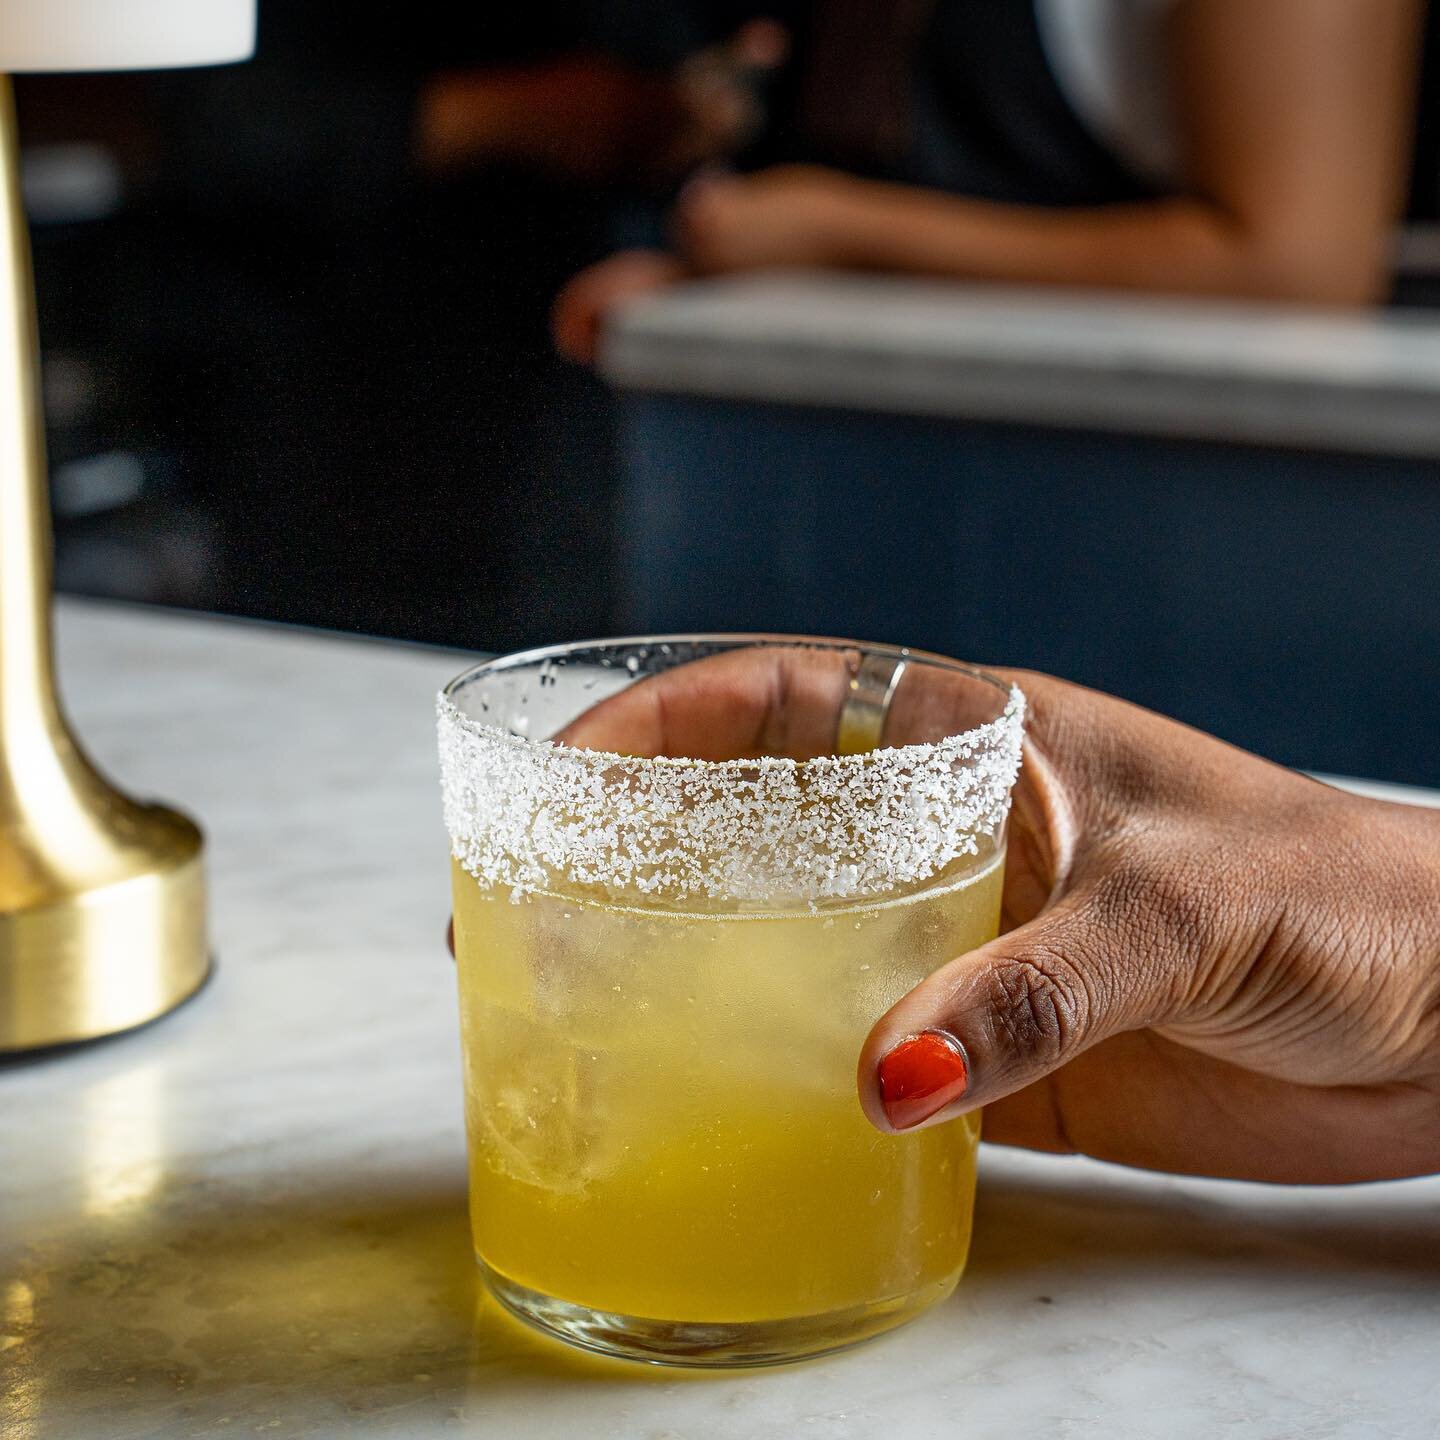 Like Spicy ? 🥵 Our ELDORADO is just the right heat with Reposado Tequila, Lemon, Suze, Fennel Honey, Espelette.

We are bringing the 🔥 starting tomorrow tomorrow at 5 pm 

📸: @heatherwillensky